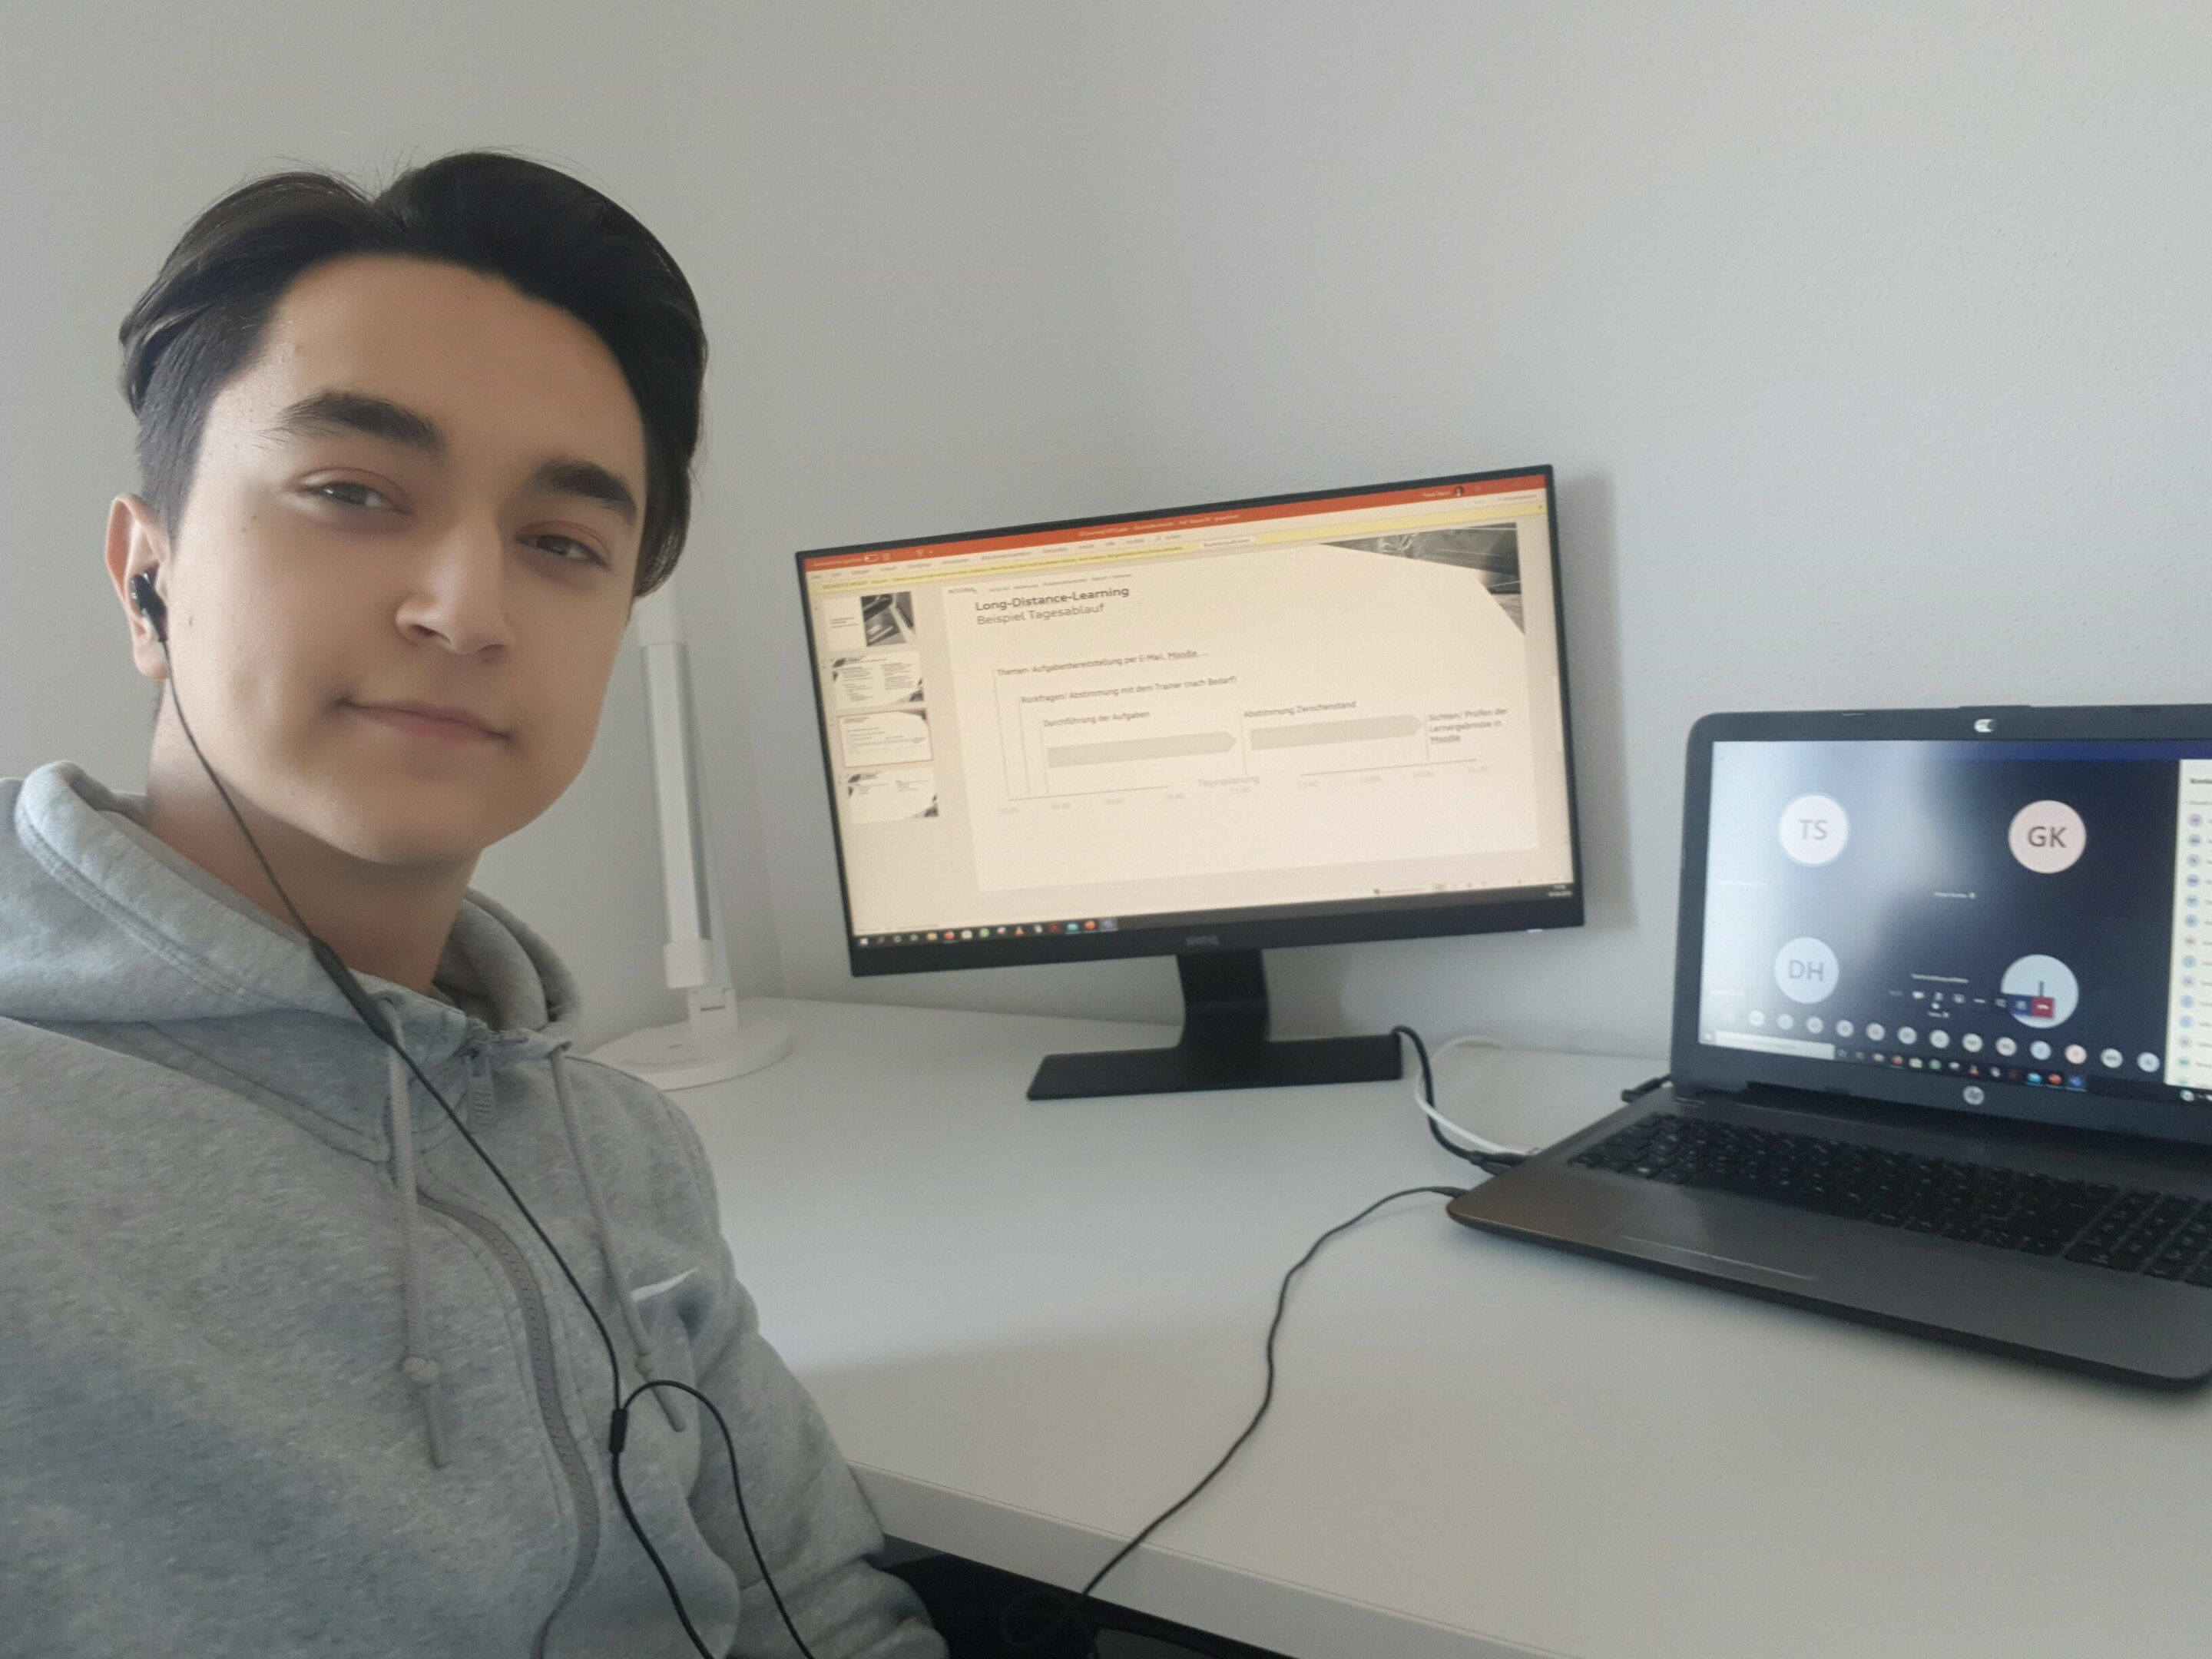 Digital life in times of corona: home learning for Audi apprentices